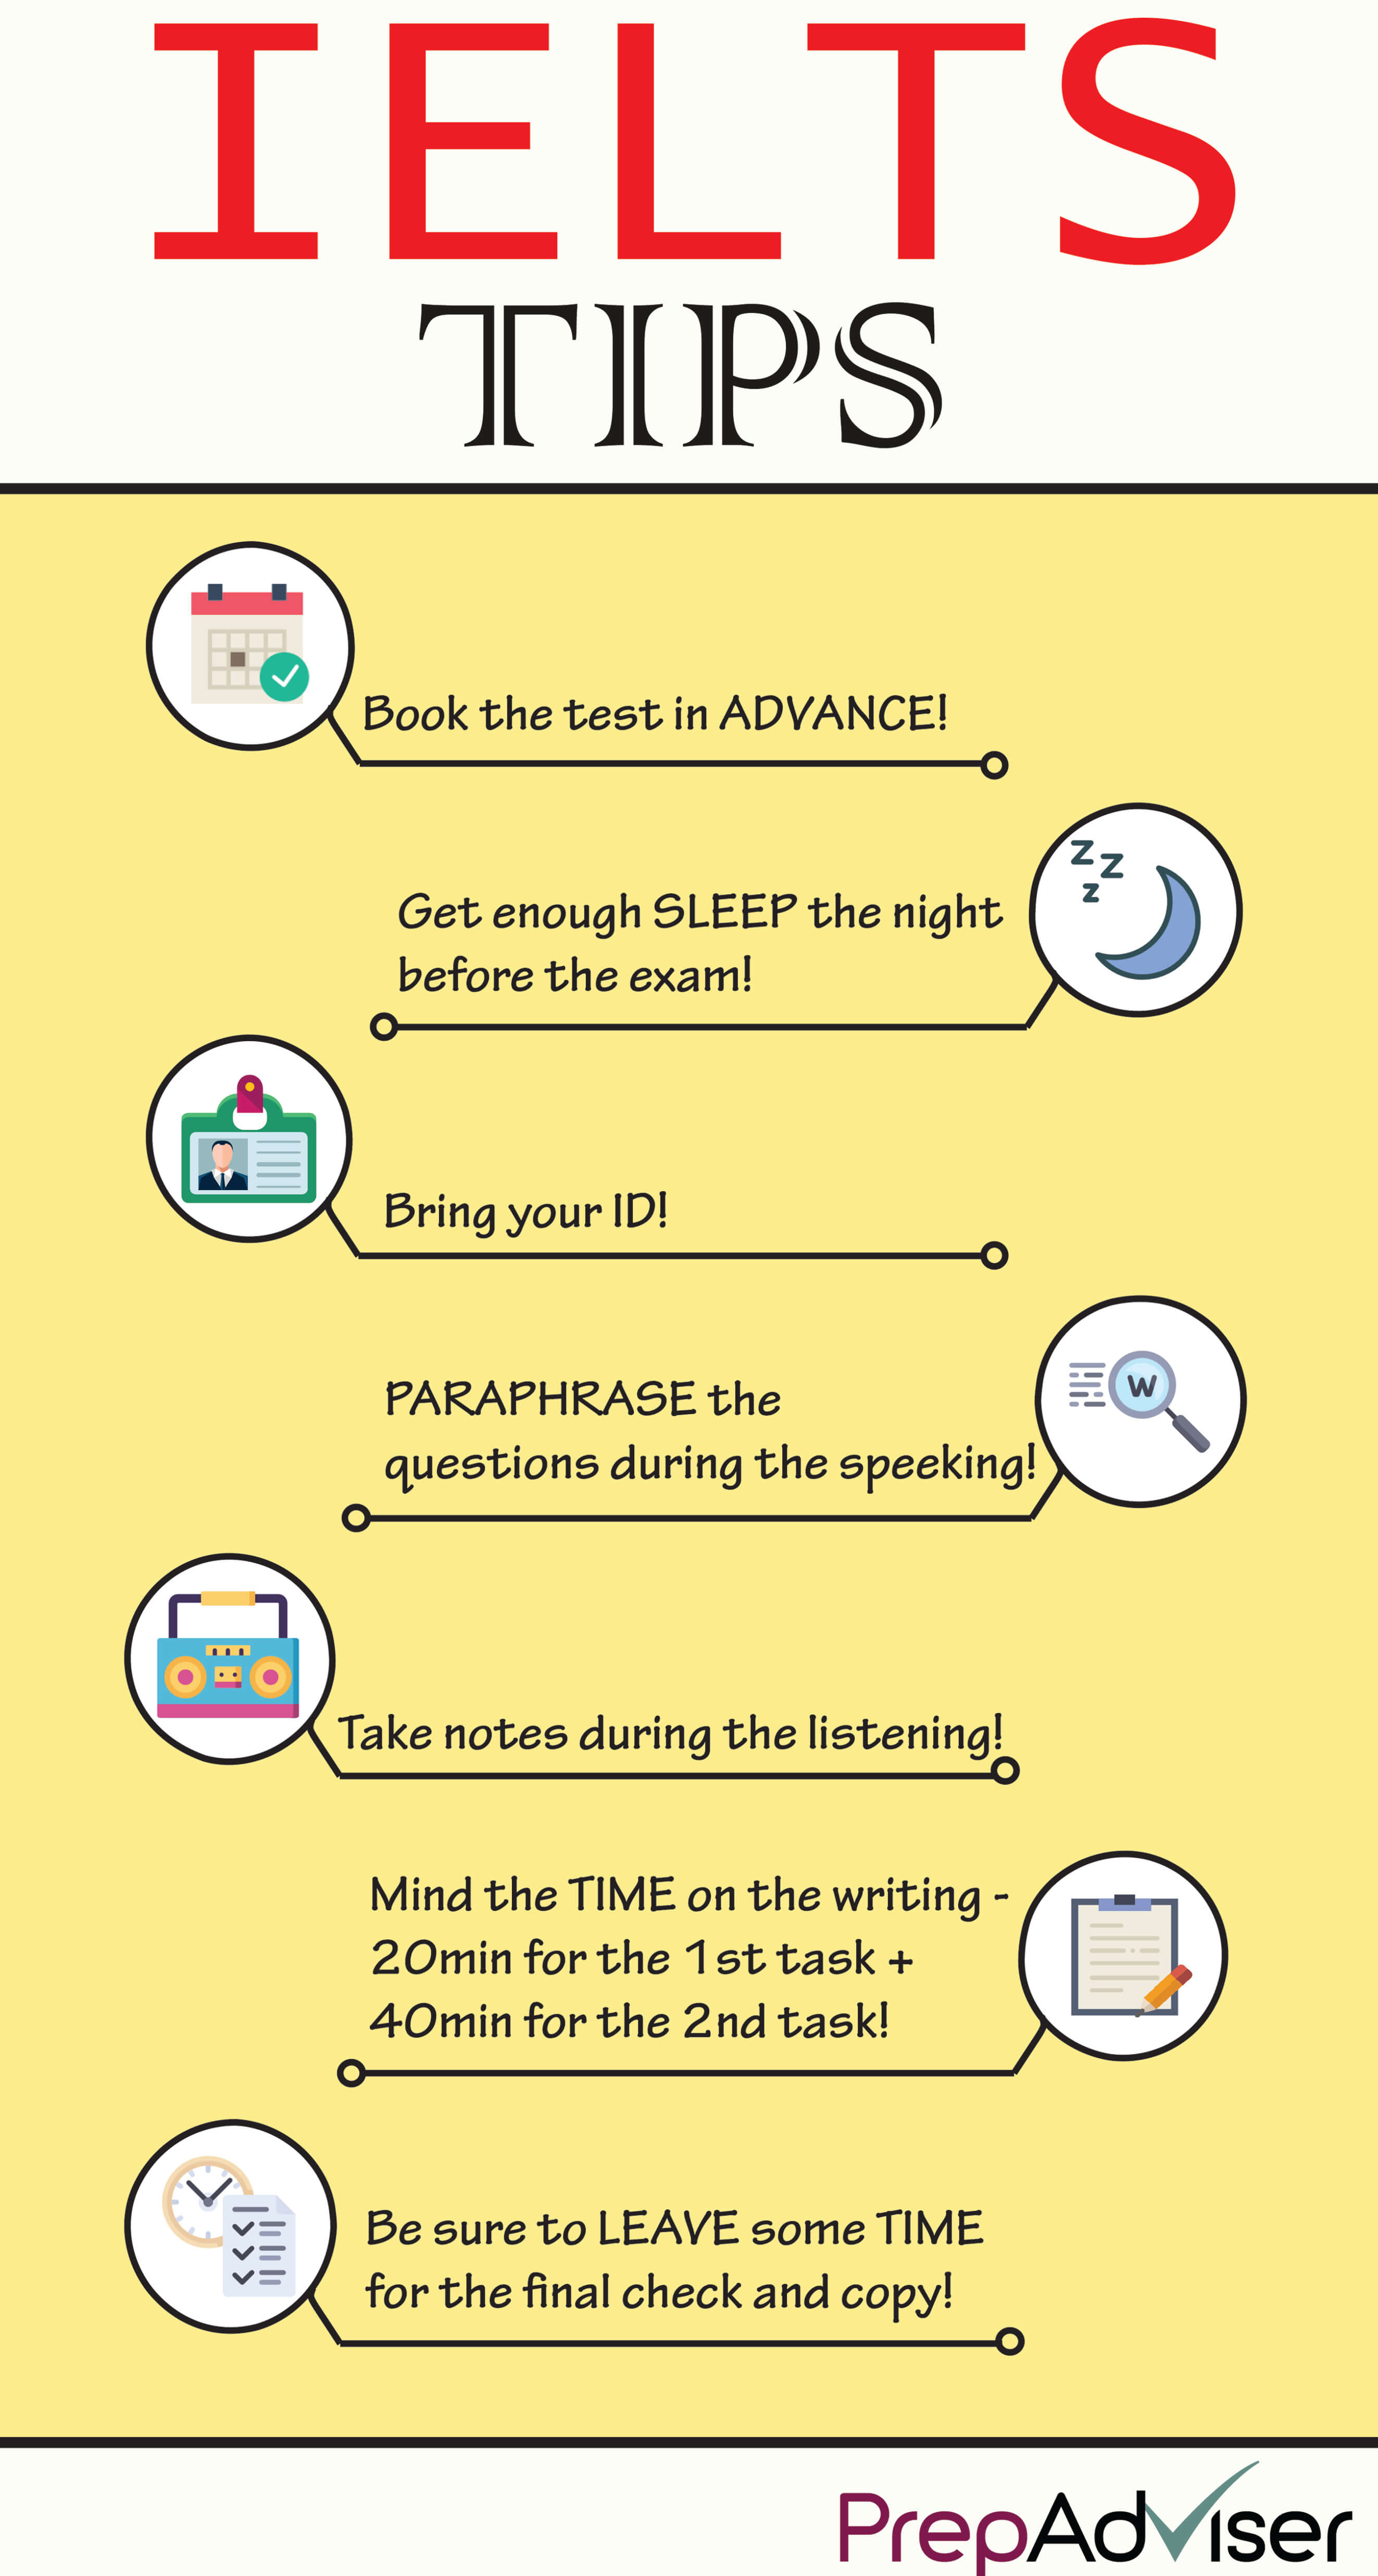 The IELTS Test tips Infographic